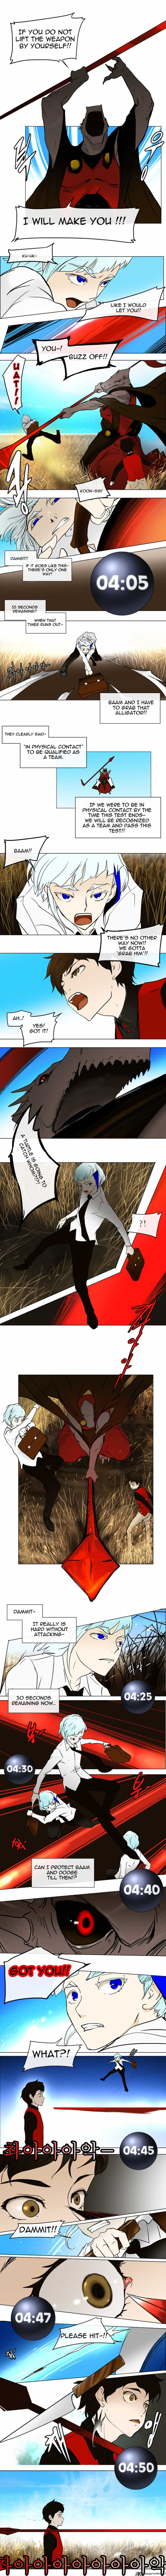 Tower Of God 8 8